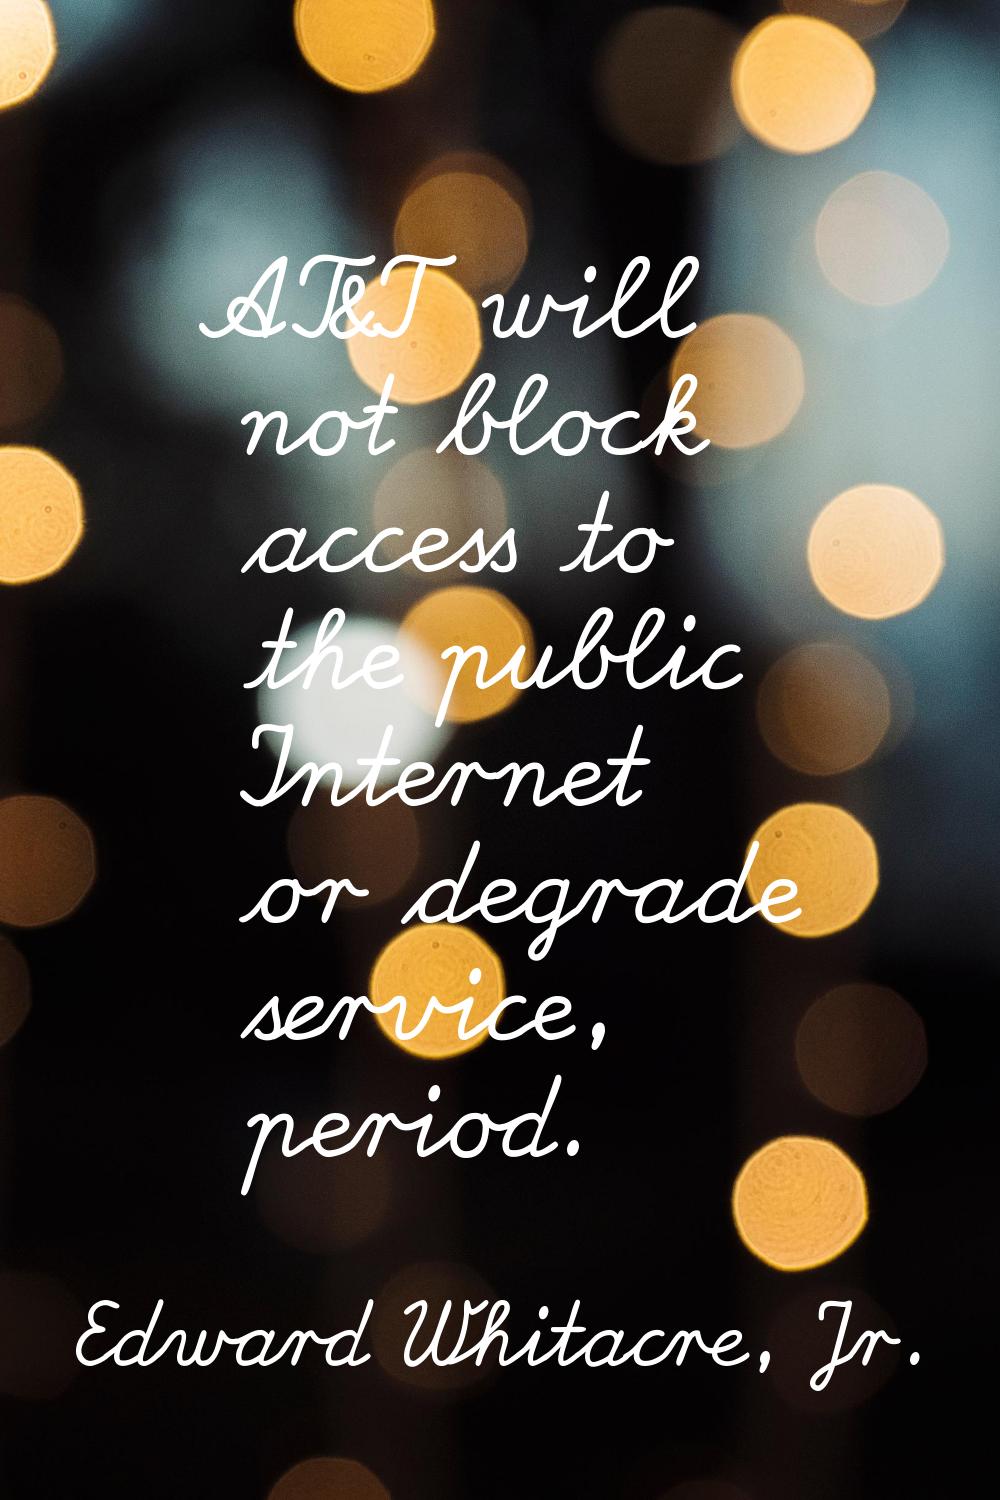 AT&T will not block access to the public Internet or degrade service, period.